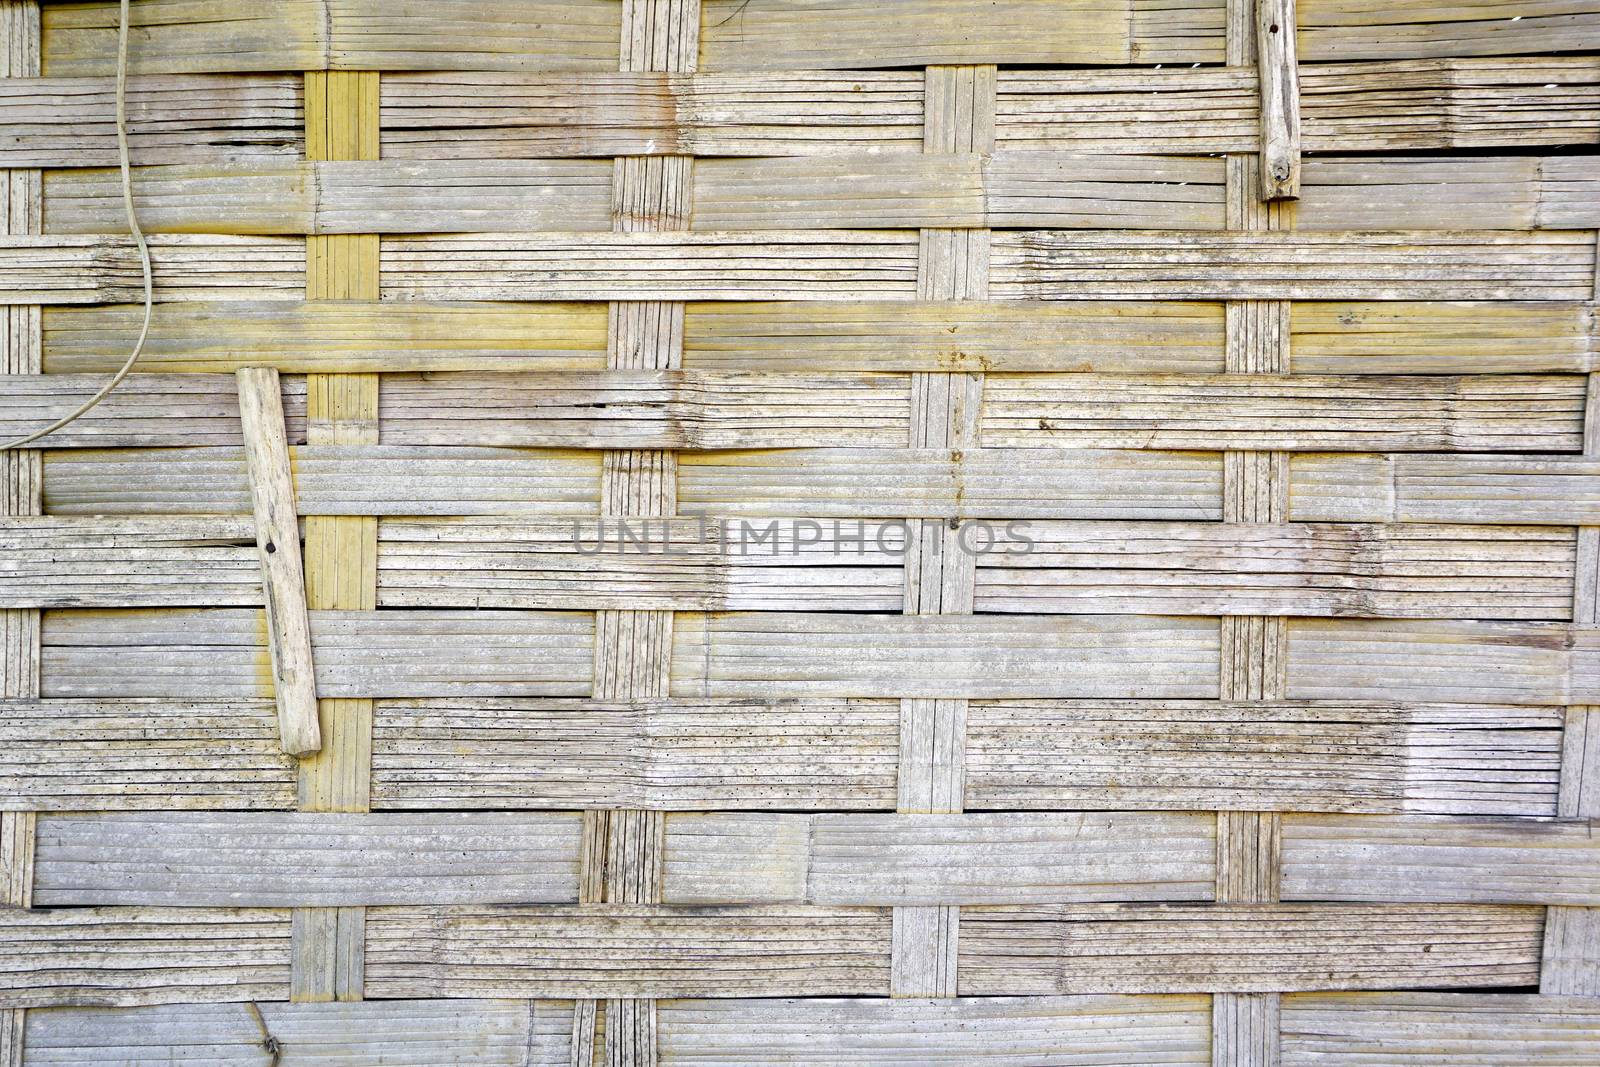 Woven bamboo strips wall vernecular outdoor in Laos